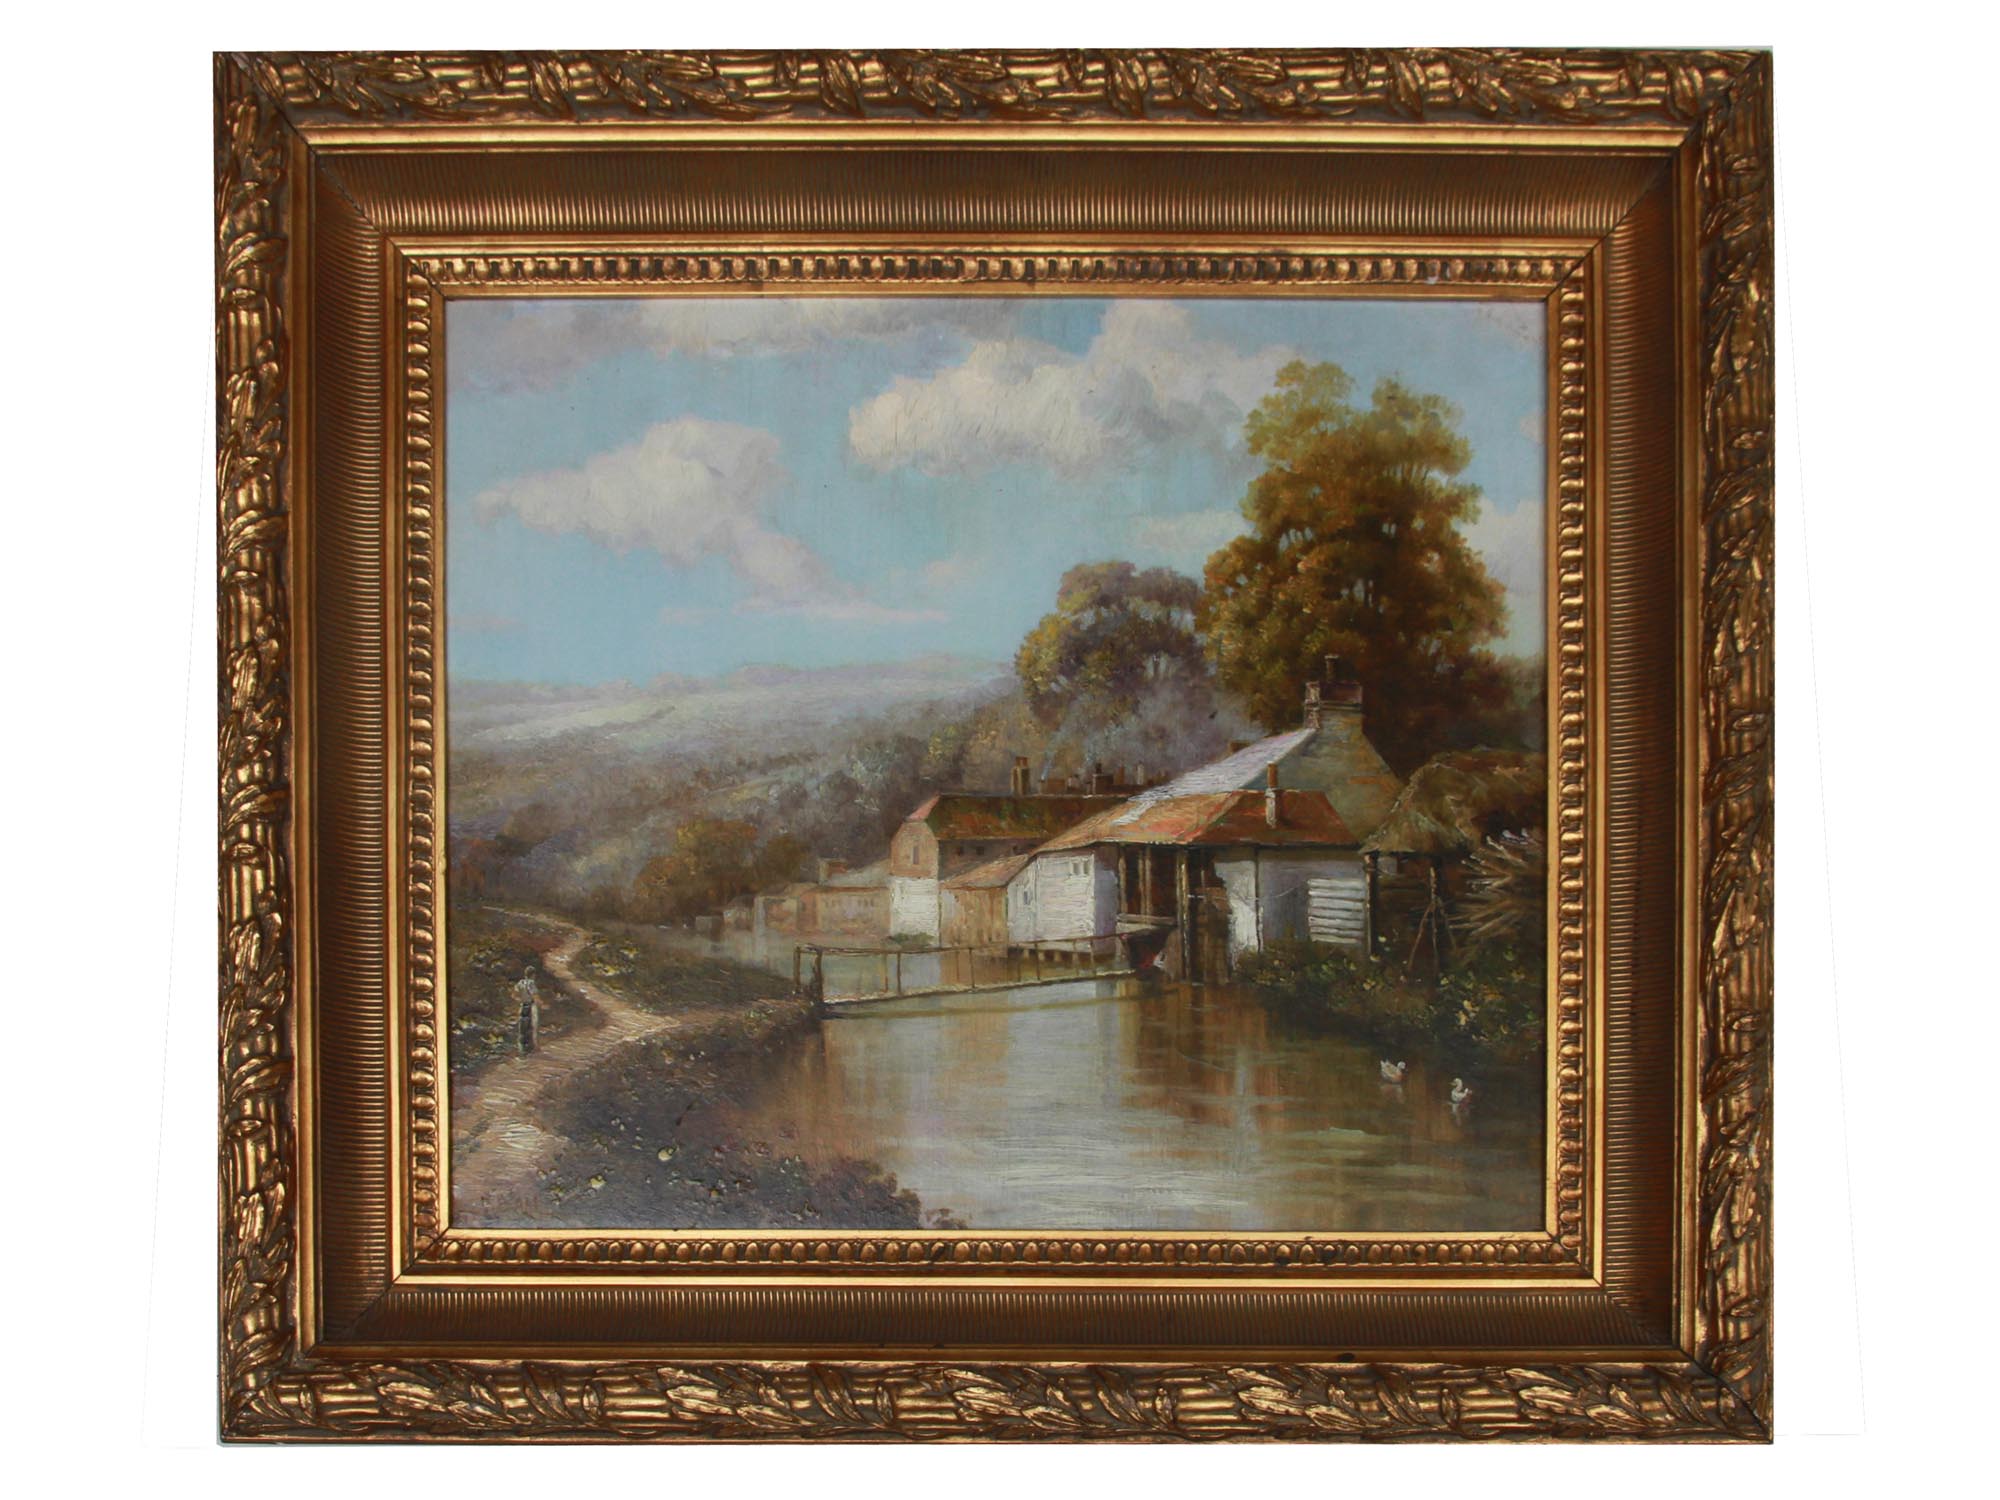 ANTIQUE ENGLISH OIL LANDSCAPE PAINTING ON CANVAS PIC-0